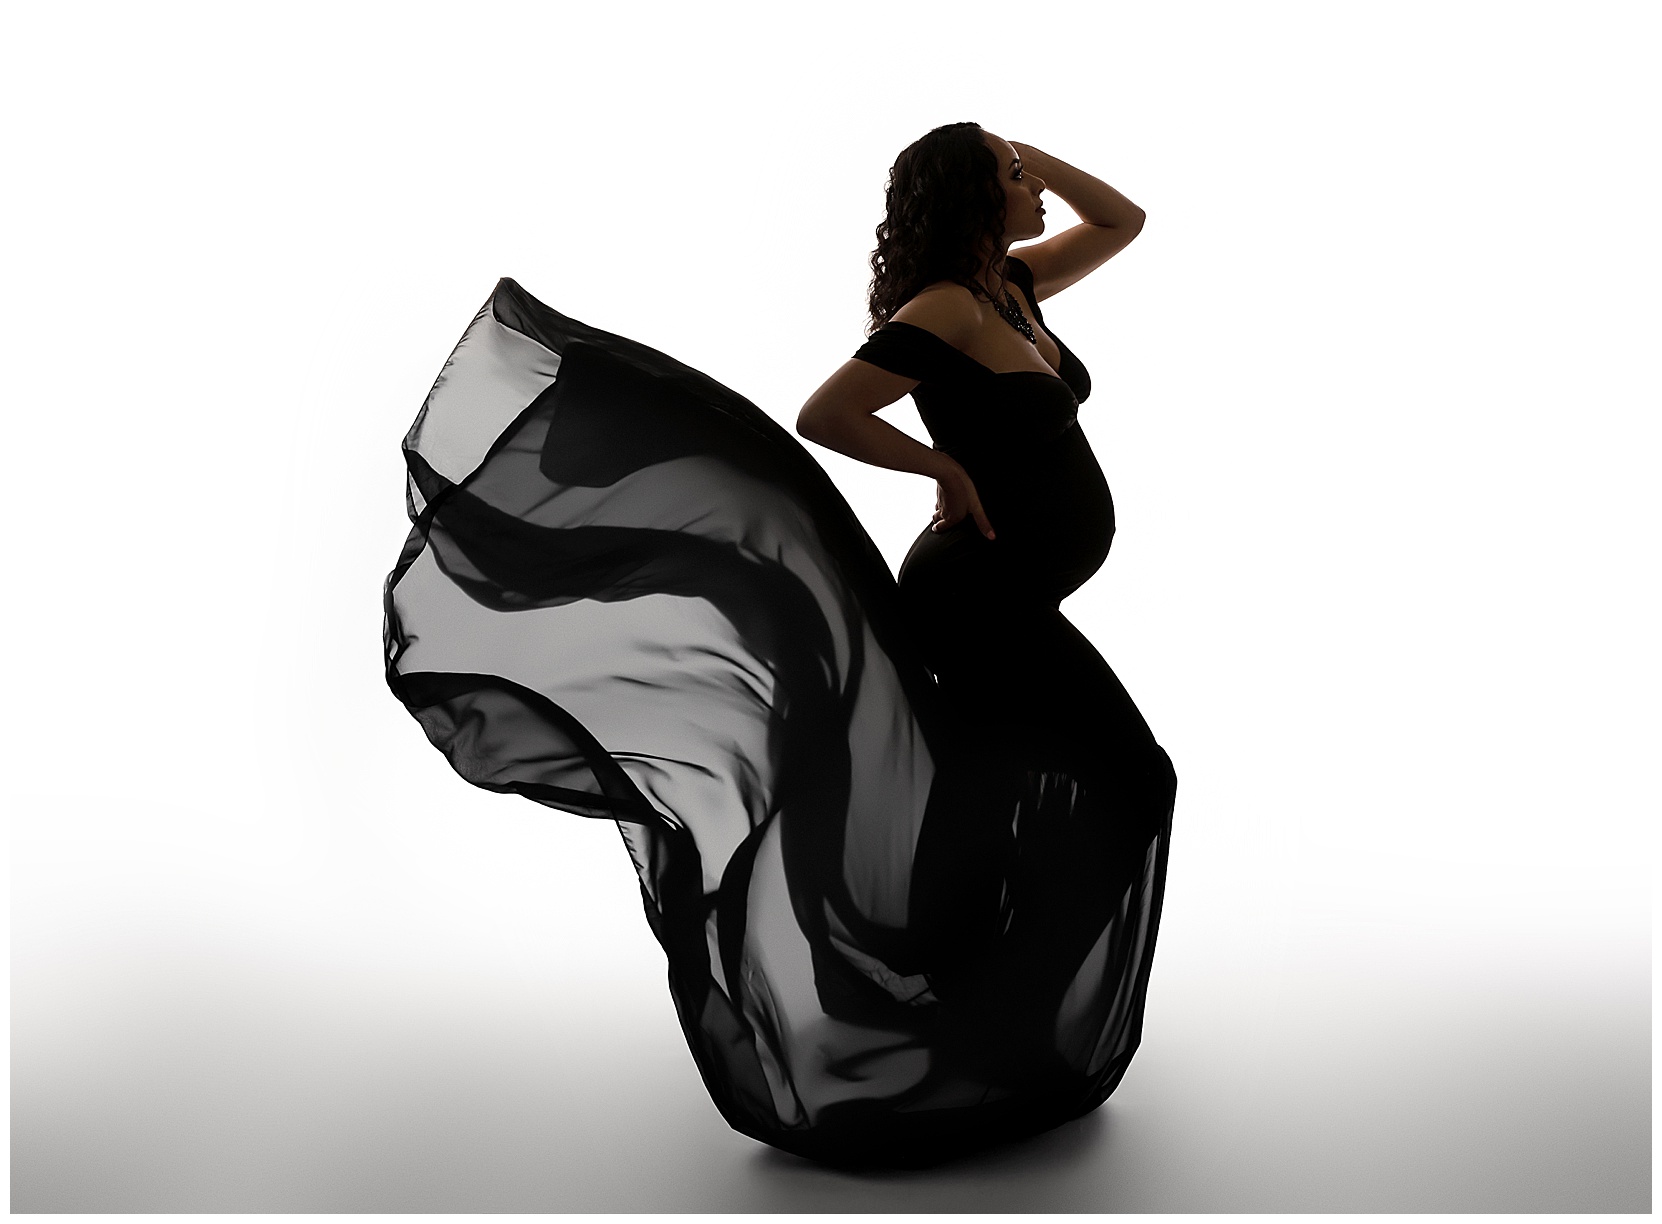 Dramatic baby bump pic silhouette on a white background featuring a woman in shadow wearing a black maternity gown. She is facing toward the right of the picture and the train of her gown is blowing behind her.